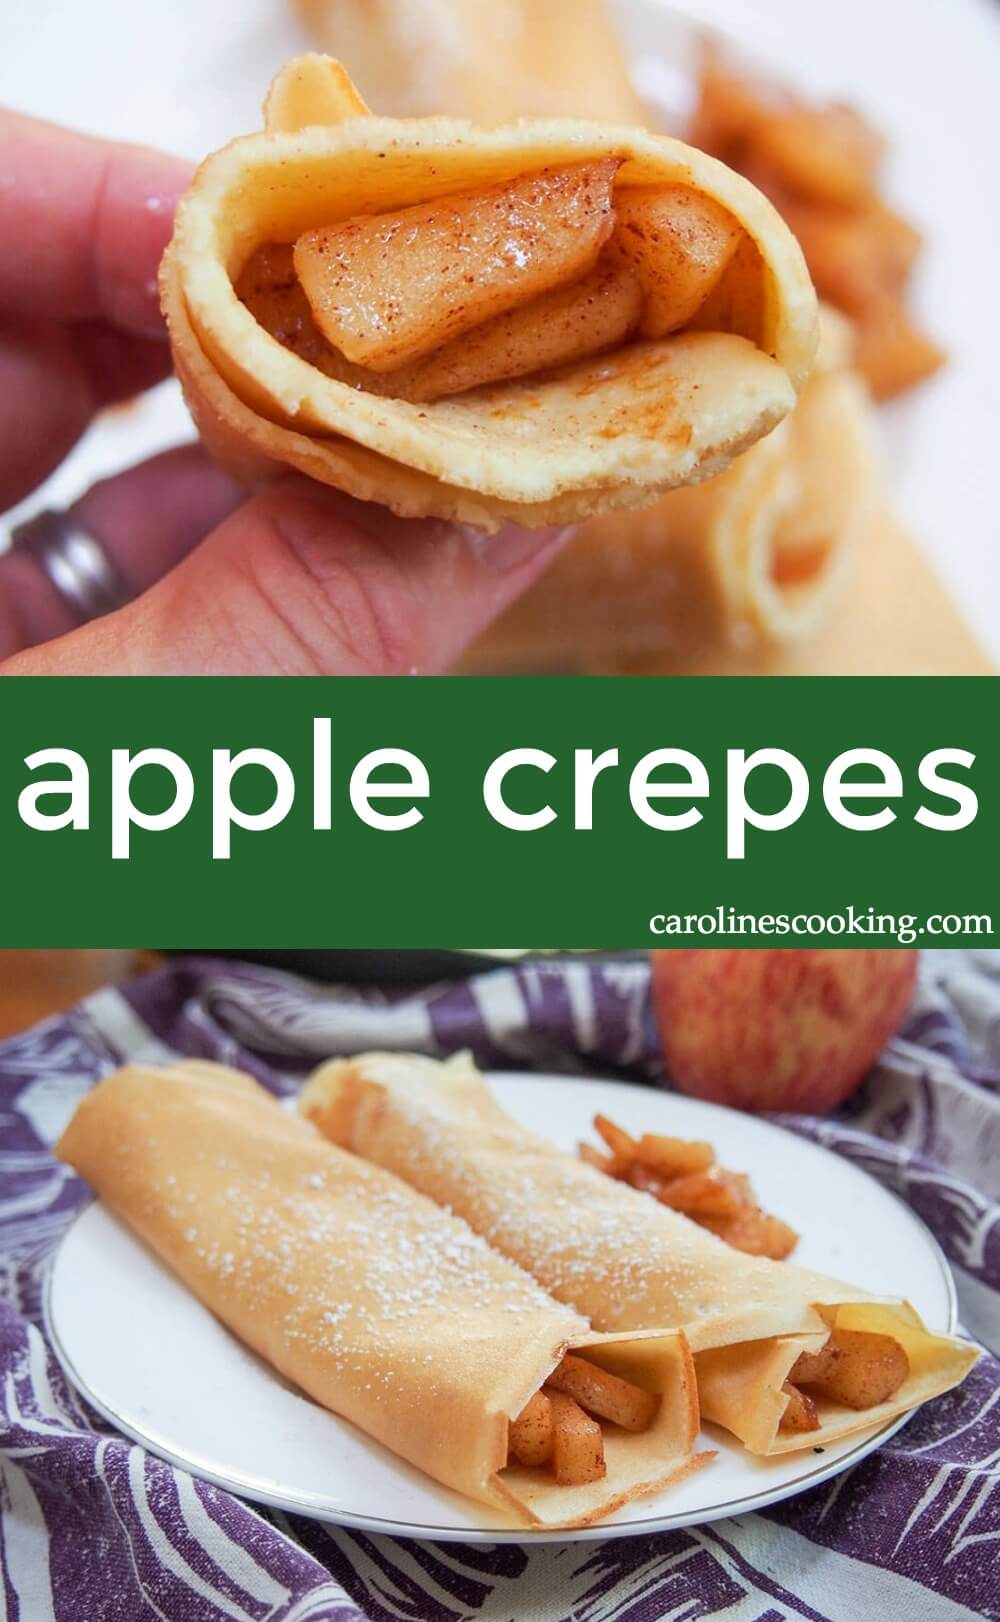 Apple Crepes: These light crepes are filled with a gently sweet, cinnamony apple filling - a delicious taste of fall!  Easy to make, and perfect for dessert, brunch, or a tasty snack.  #apple #brunch #dessert #crepes